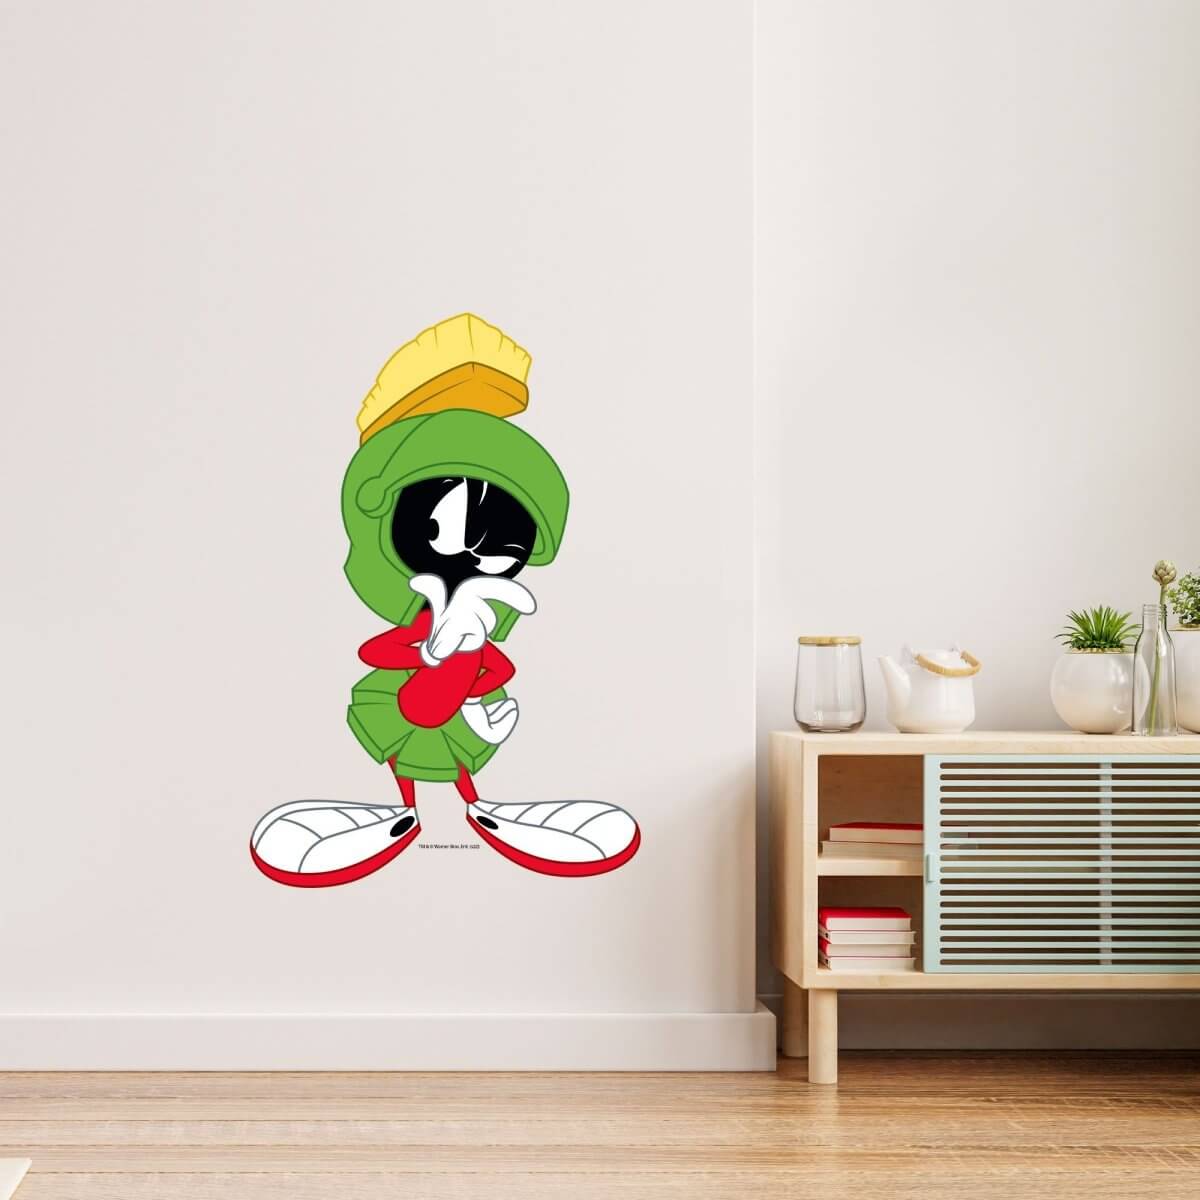 Kismet Decals Looney Tunes Marvin in Thought Licensed Wall Sticker - Easy DIY Home & Kids Room Decor Wall Decal Art - Kismet Decals